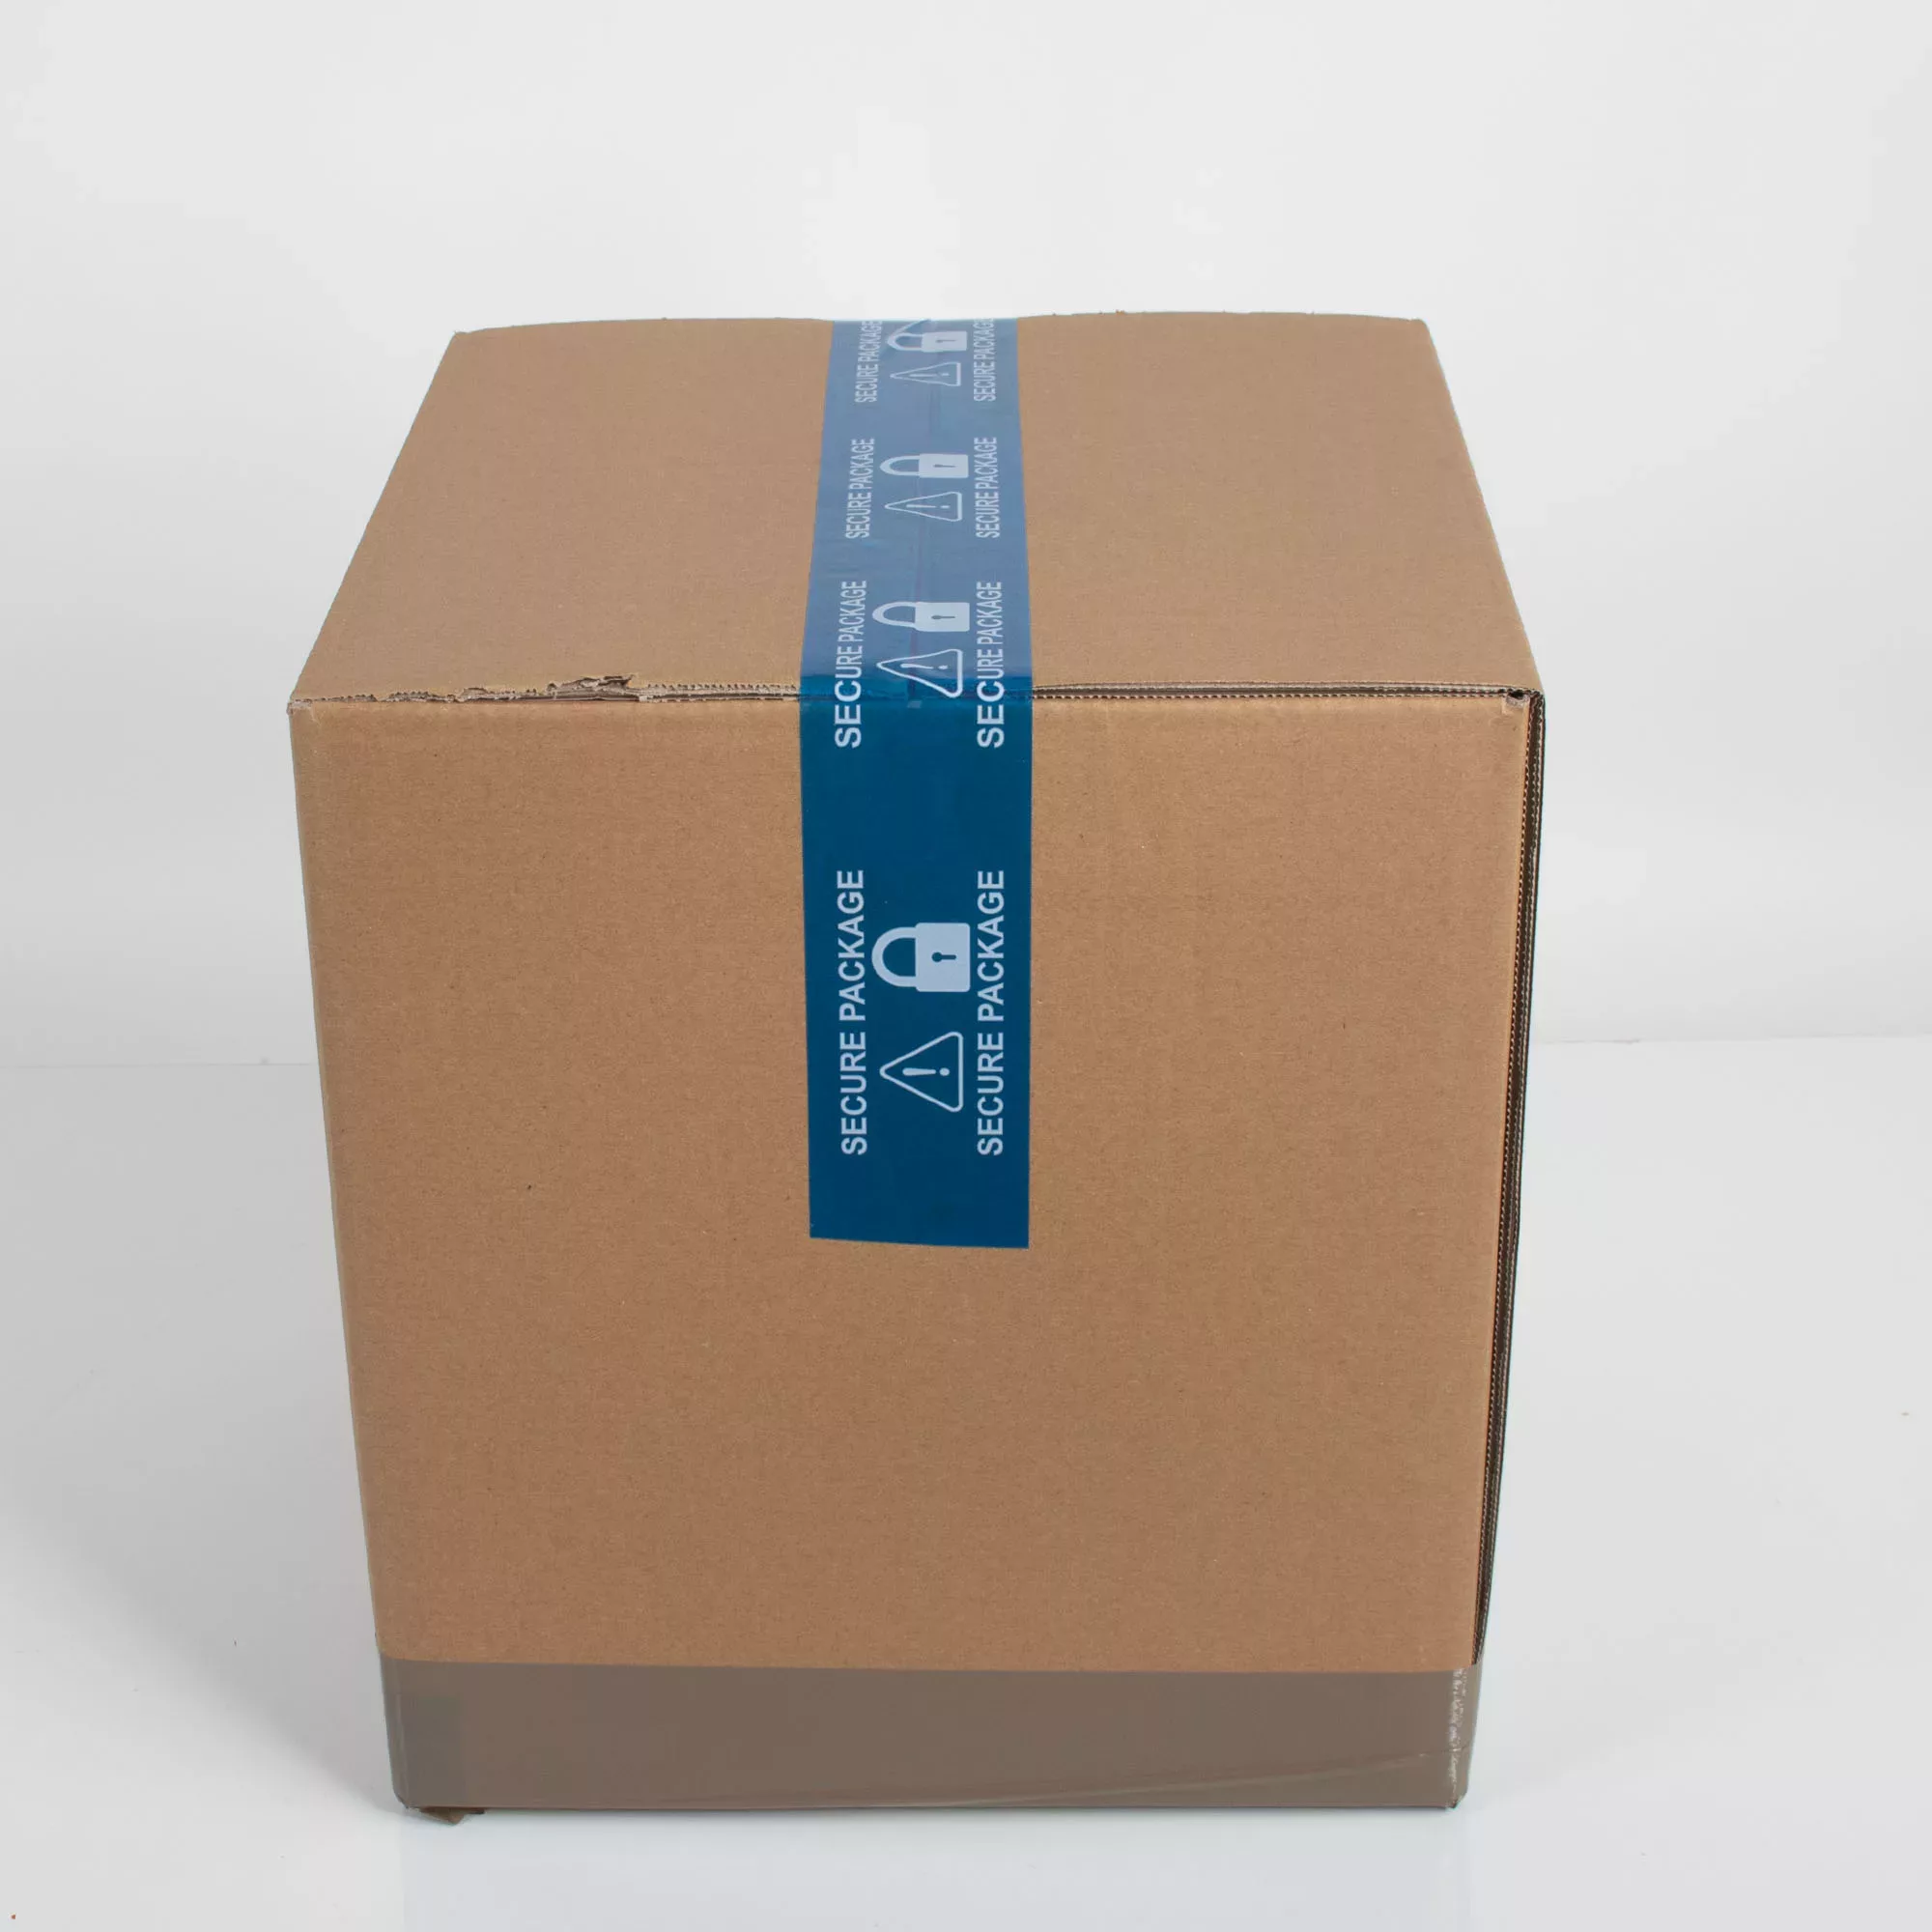 Tampertech Secure Package blue tamper evident box tape applied to a cardboard box